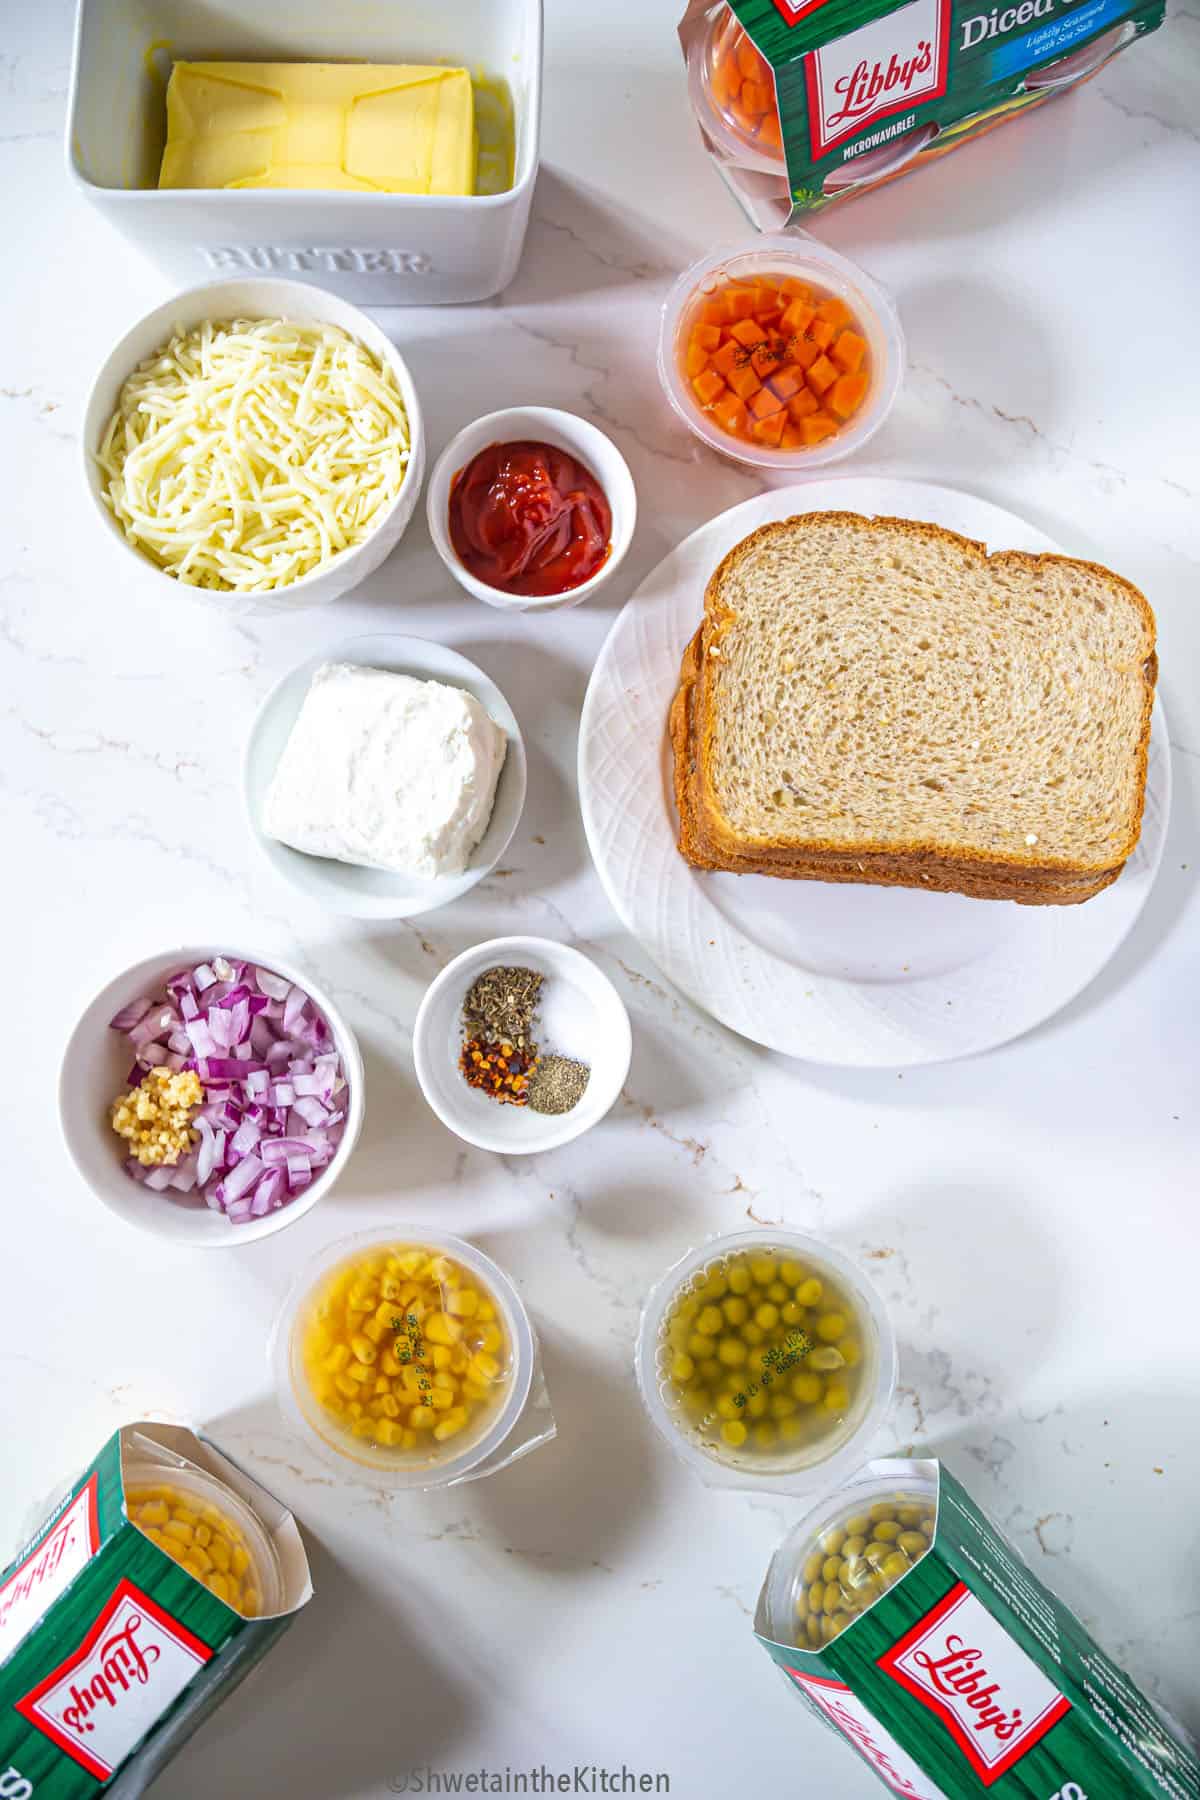 All the ingredients for vegetable sandwich laid on a white surface